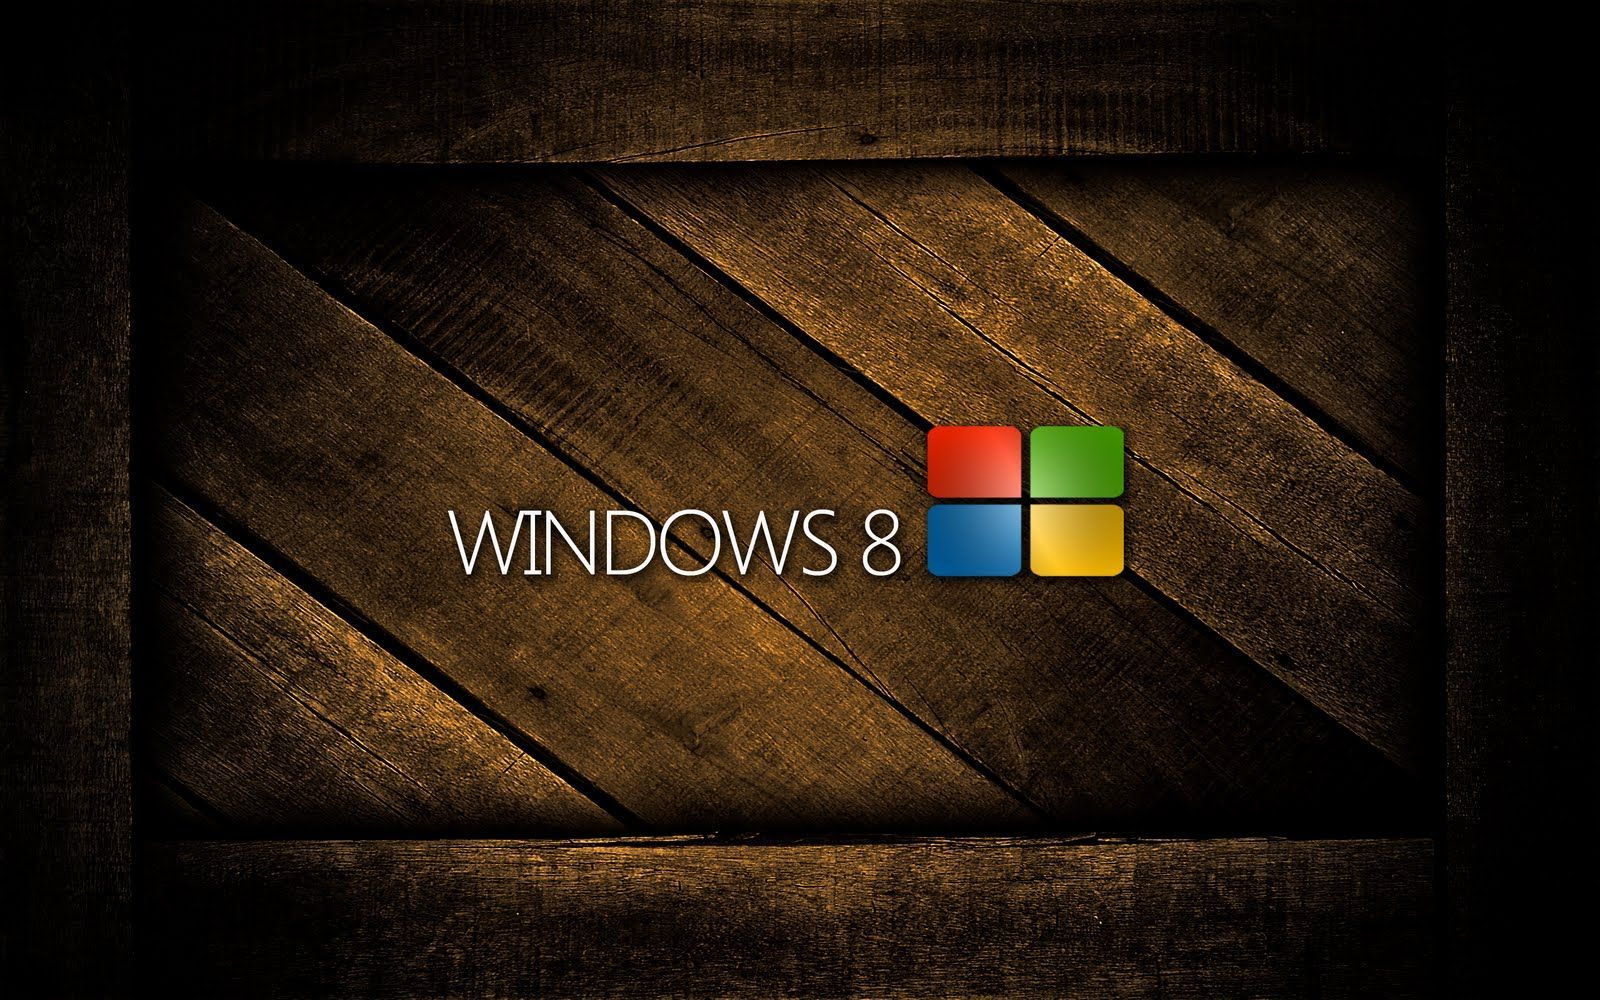 Hd wallpapers for windows 8 widescreen